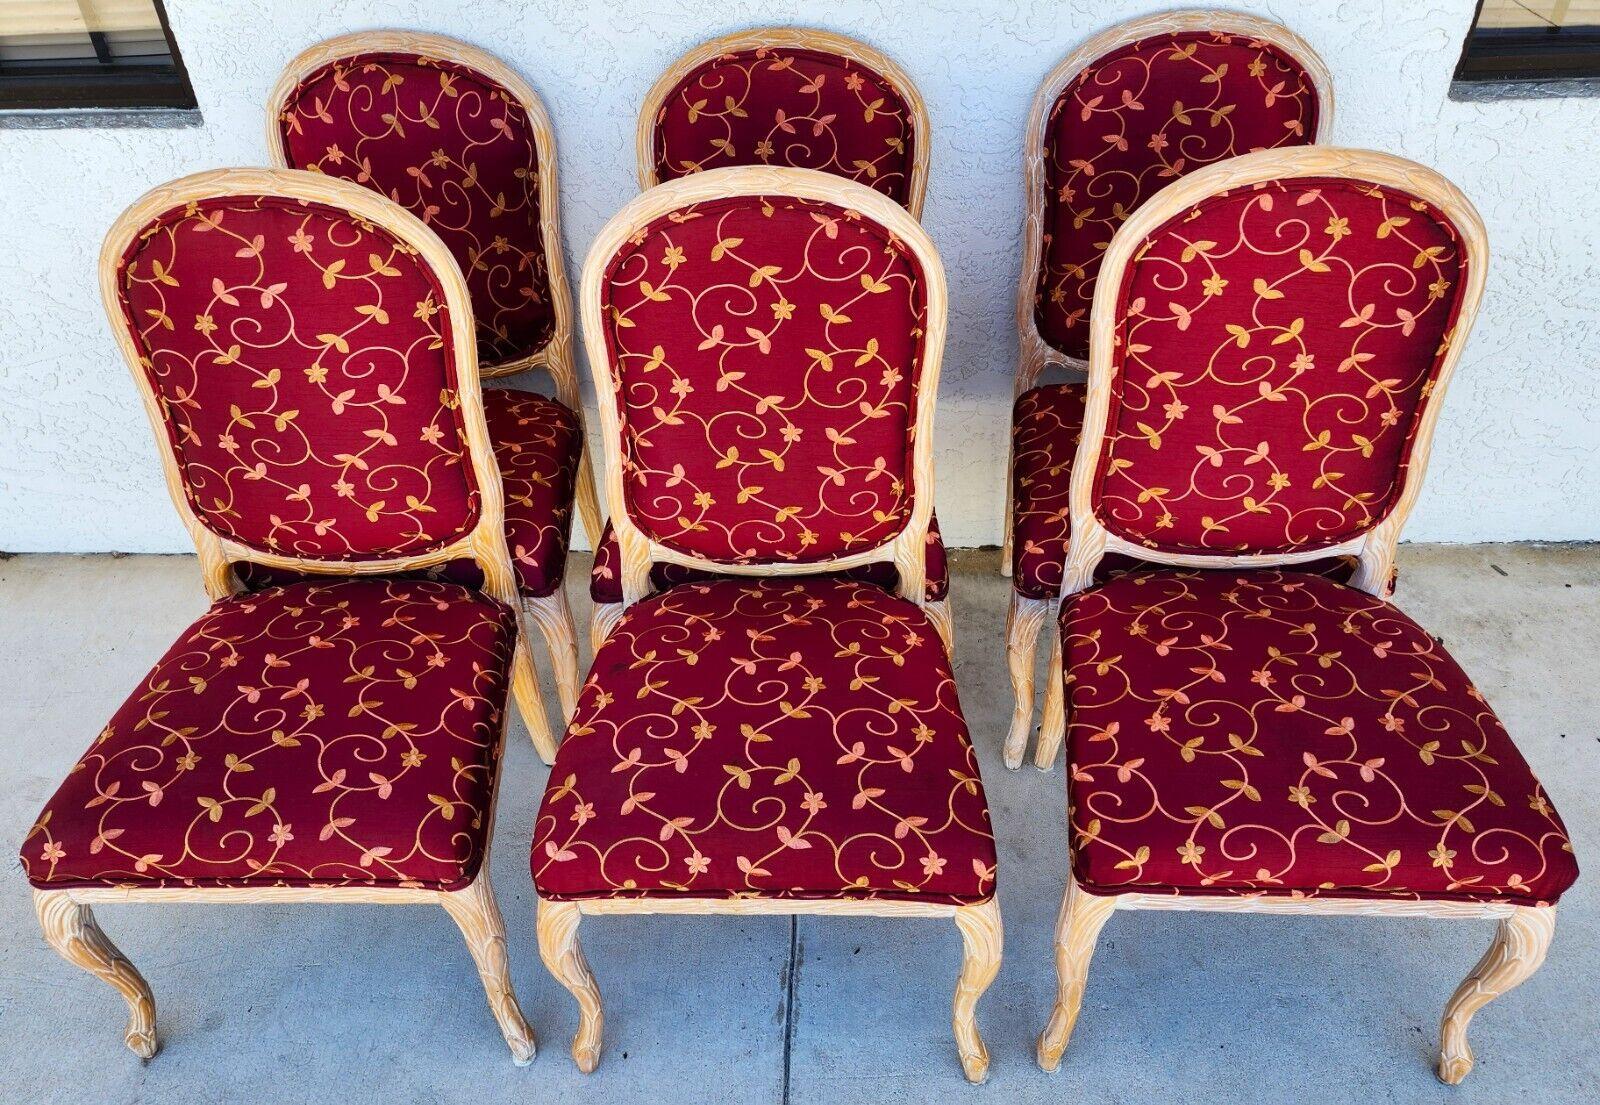 Offering one of our recent Palm Beach estate fine furniture acquisitions of
Set of 6 Chateau Dax Faux Bois Dining Chairs (labeled) 
Featuring embroidered fabric, and solid wood construction in natural color and with a clear varnish.

Approximate